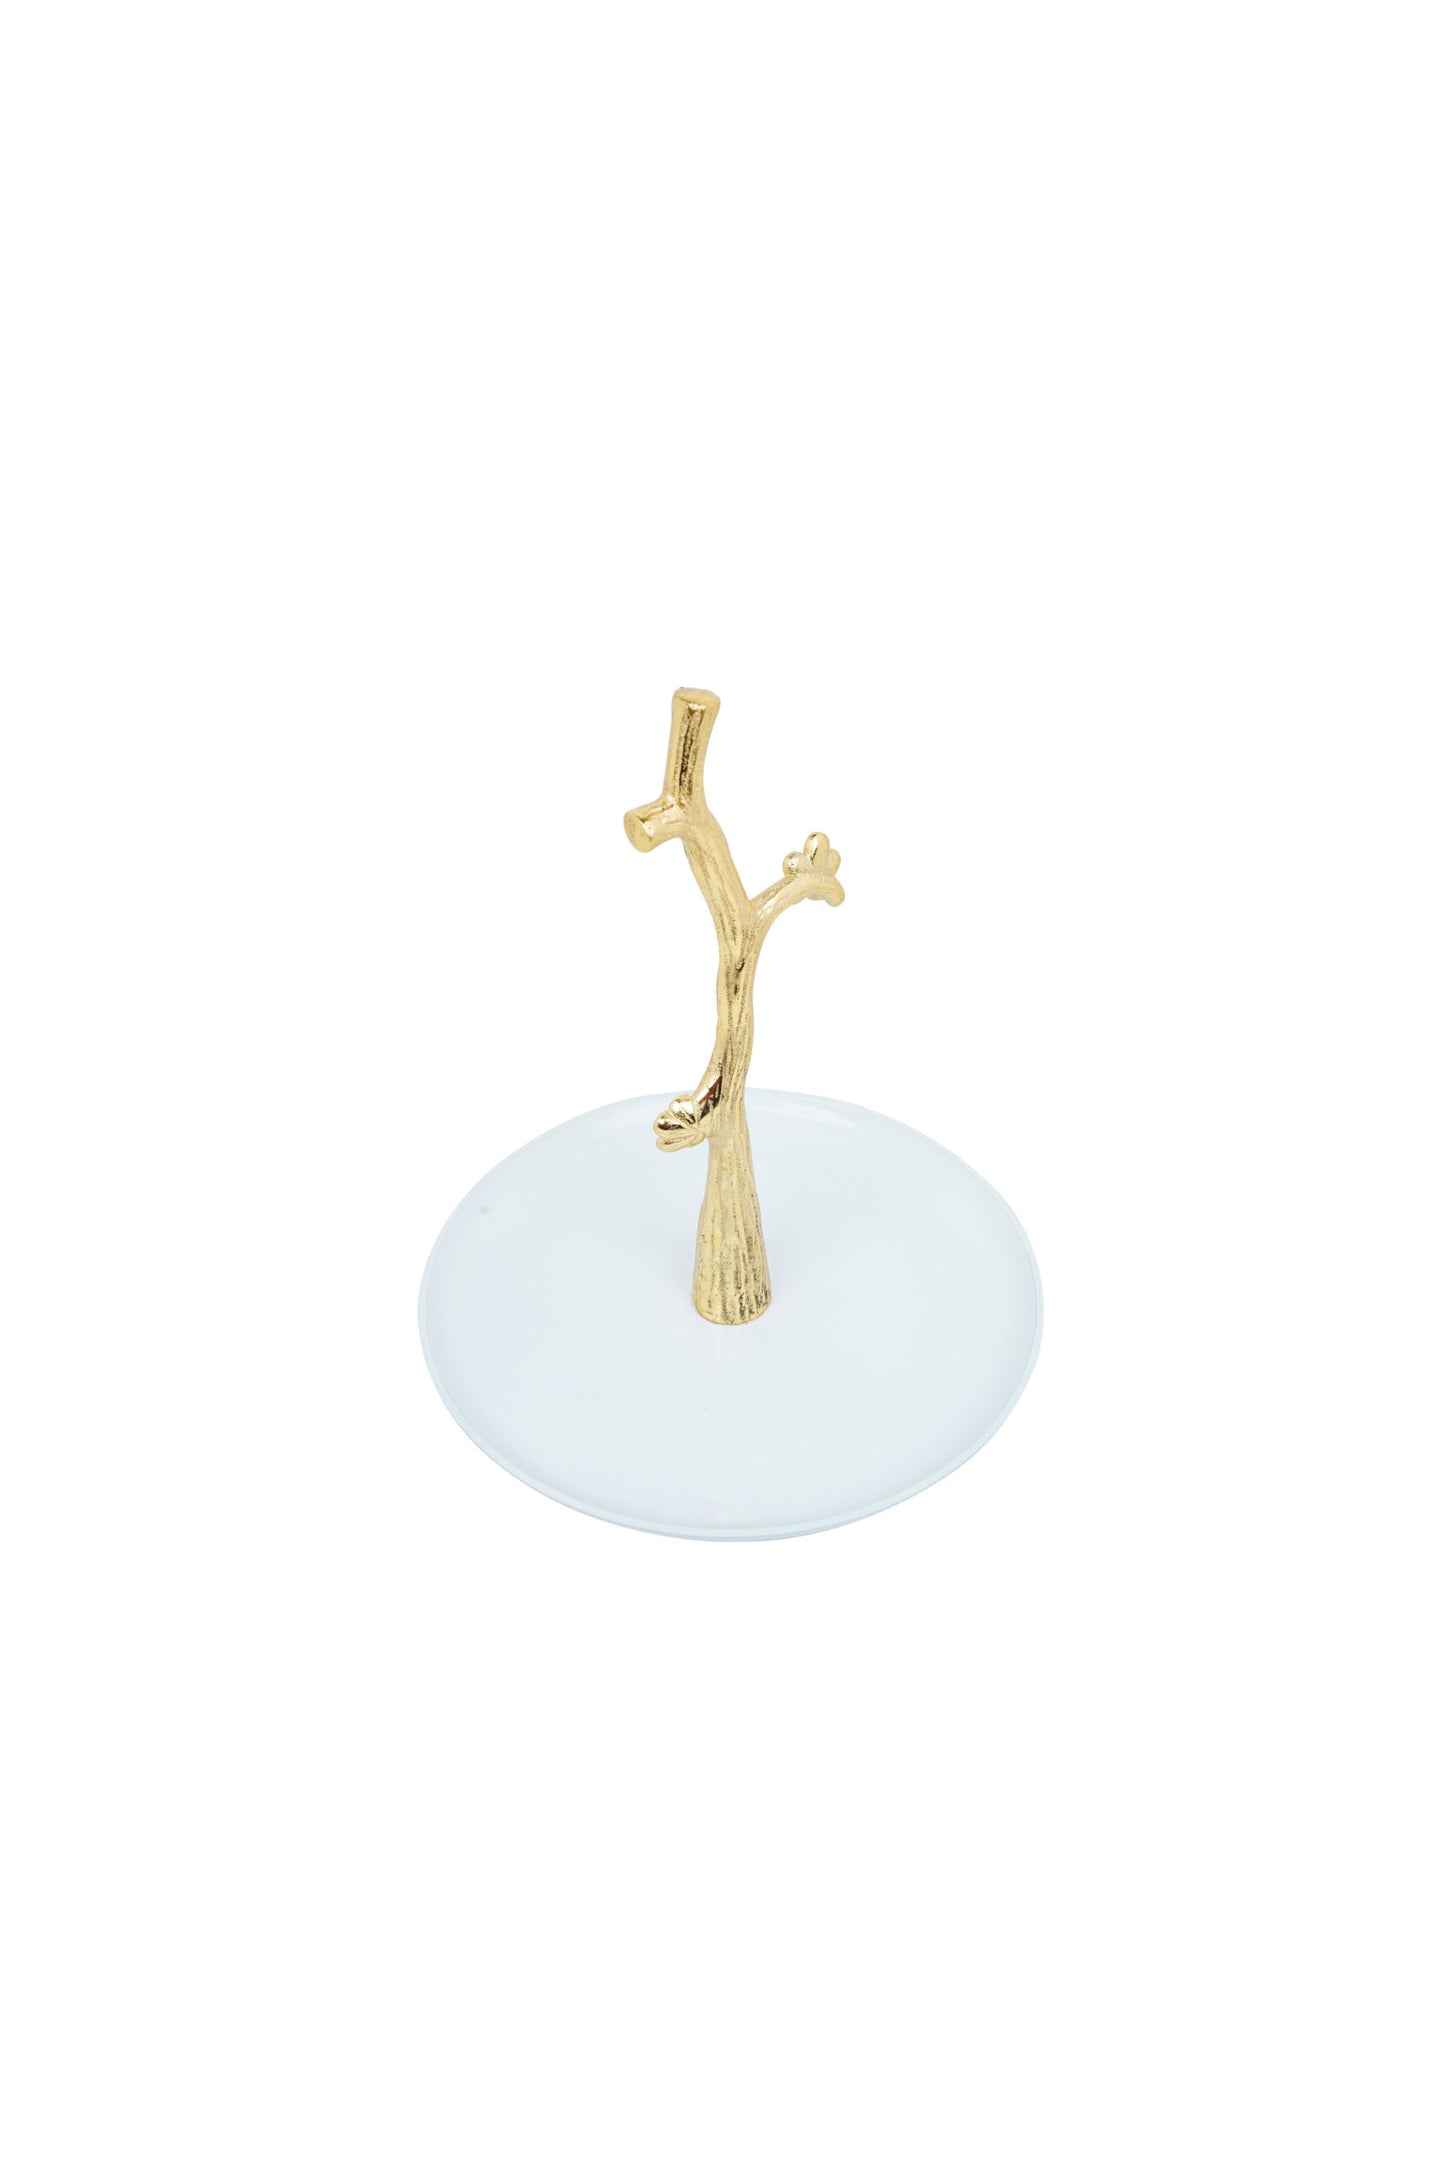 Gold Branch Cake Stand